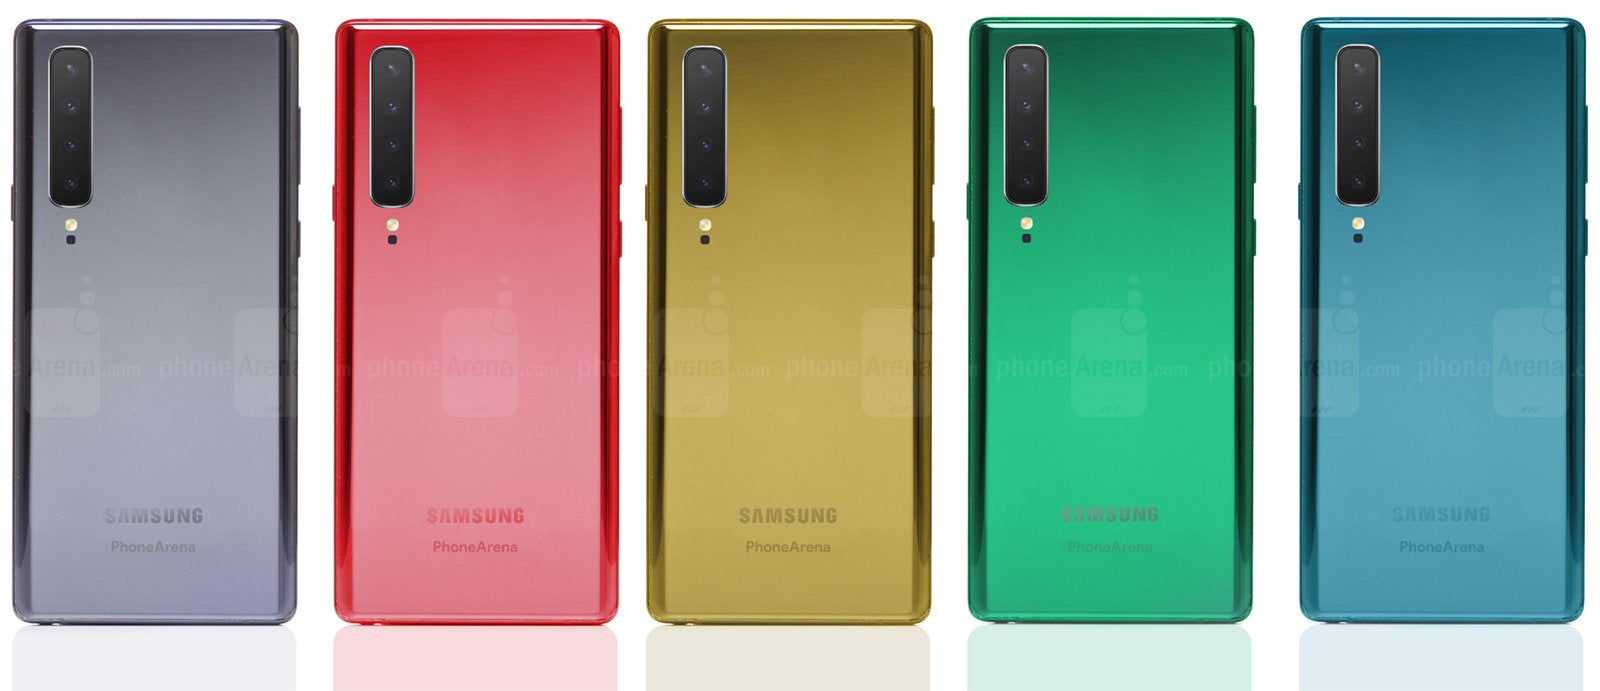 Expected color variants for the Galaxy Note 10 - Galaxy Note 10 price and release date expectations: in-depth analysis